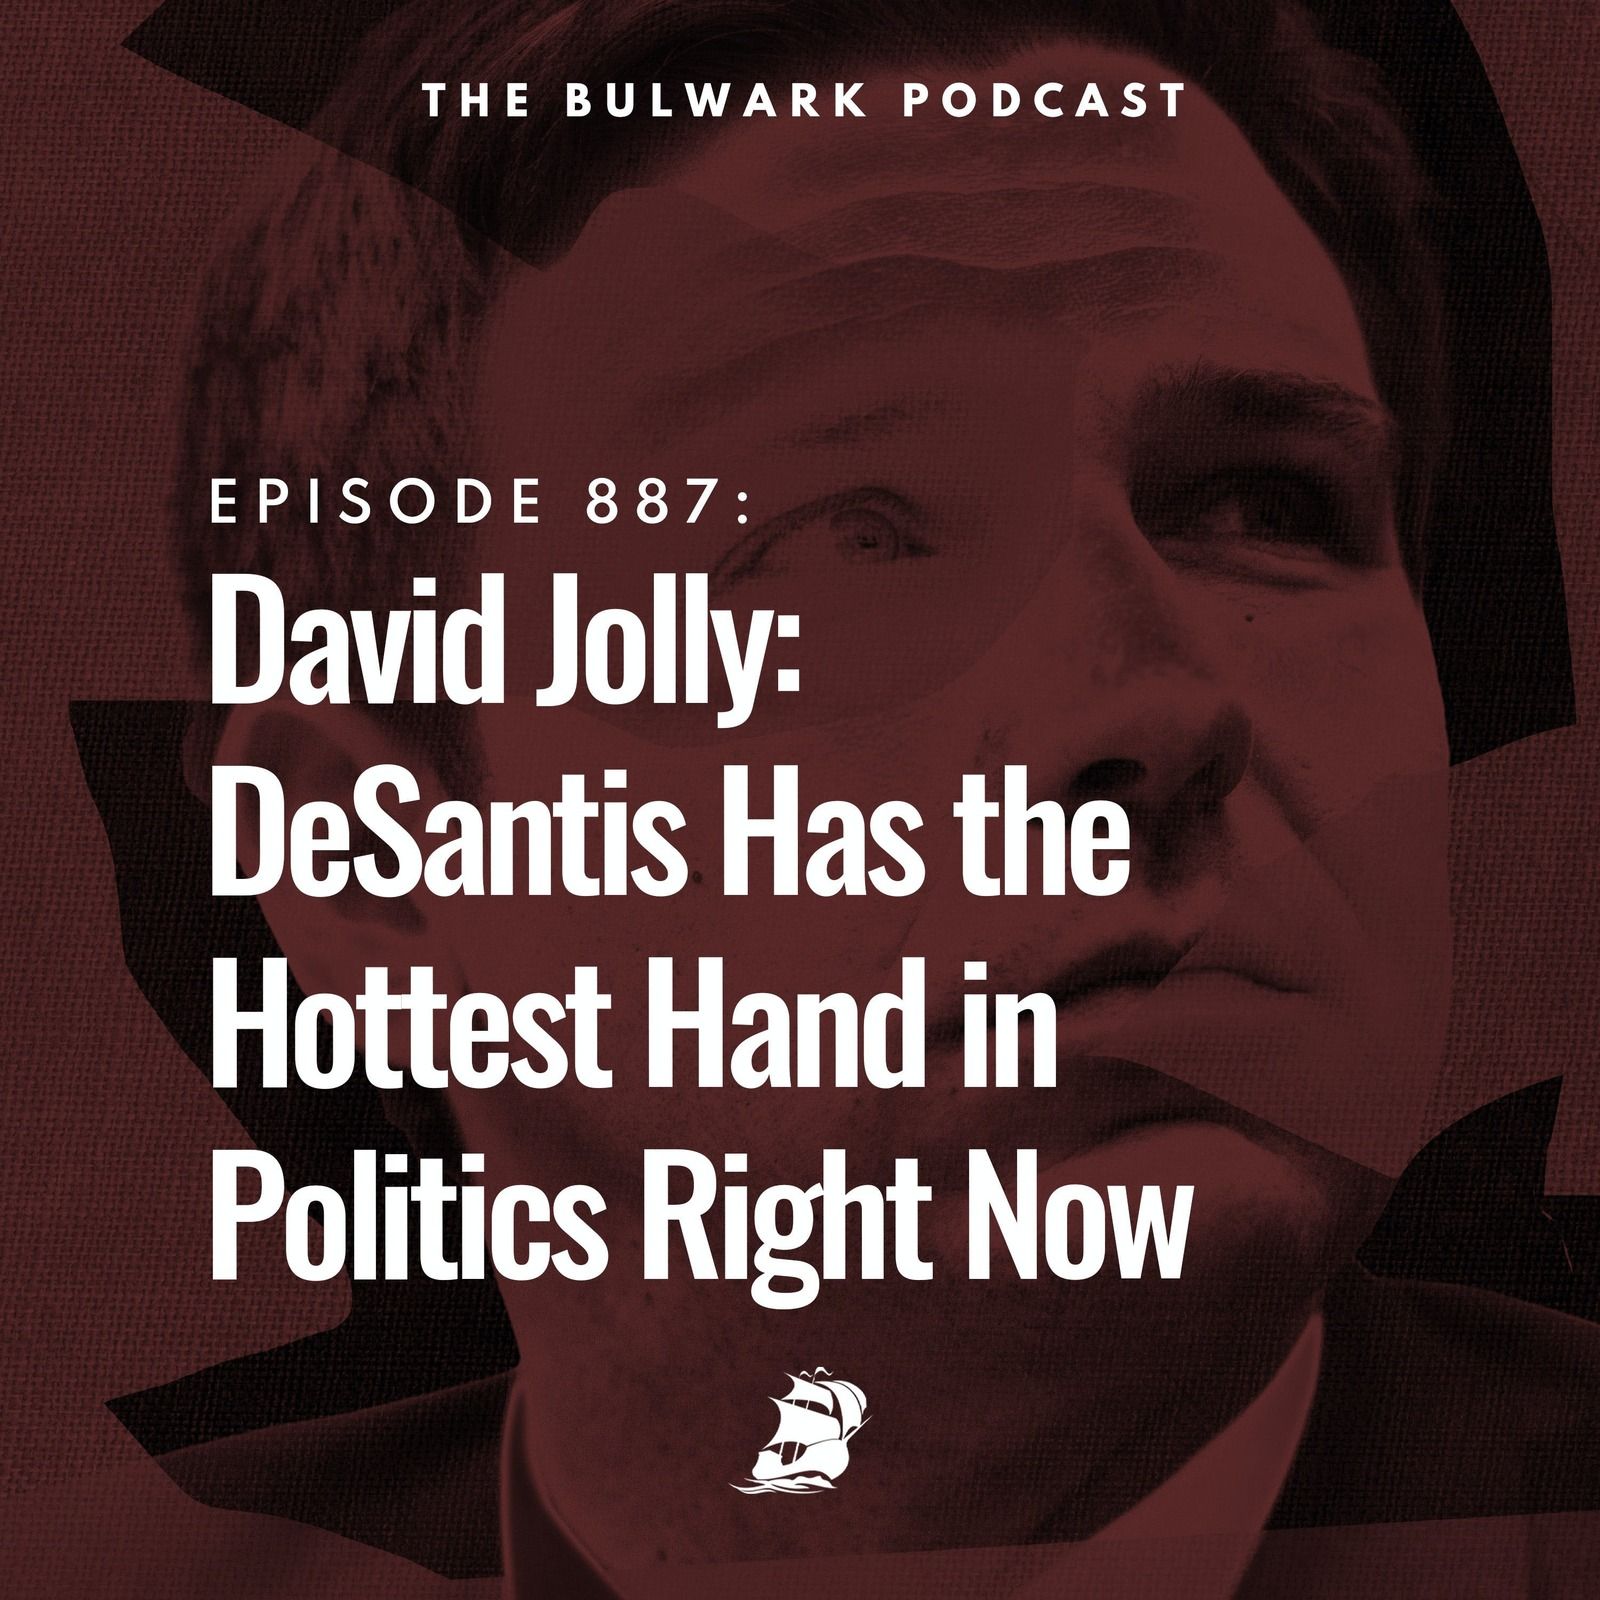 David Jolly: DeSantis Has the Hottest Hand in Politics Right Now